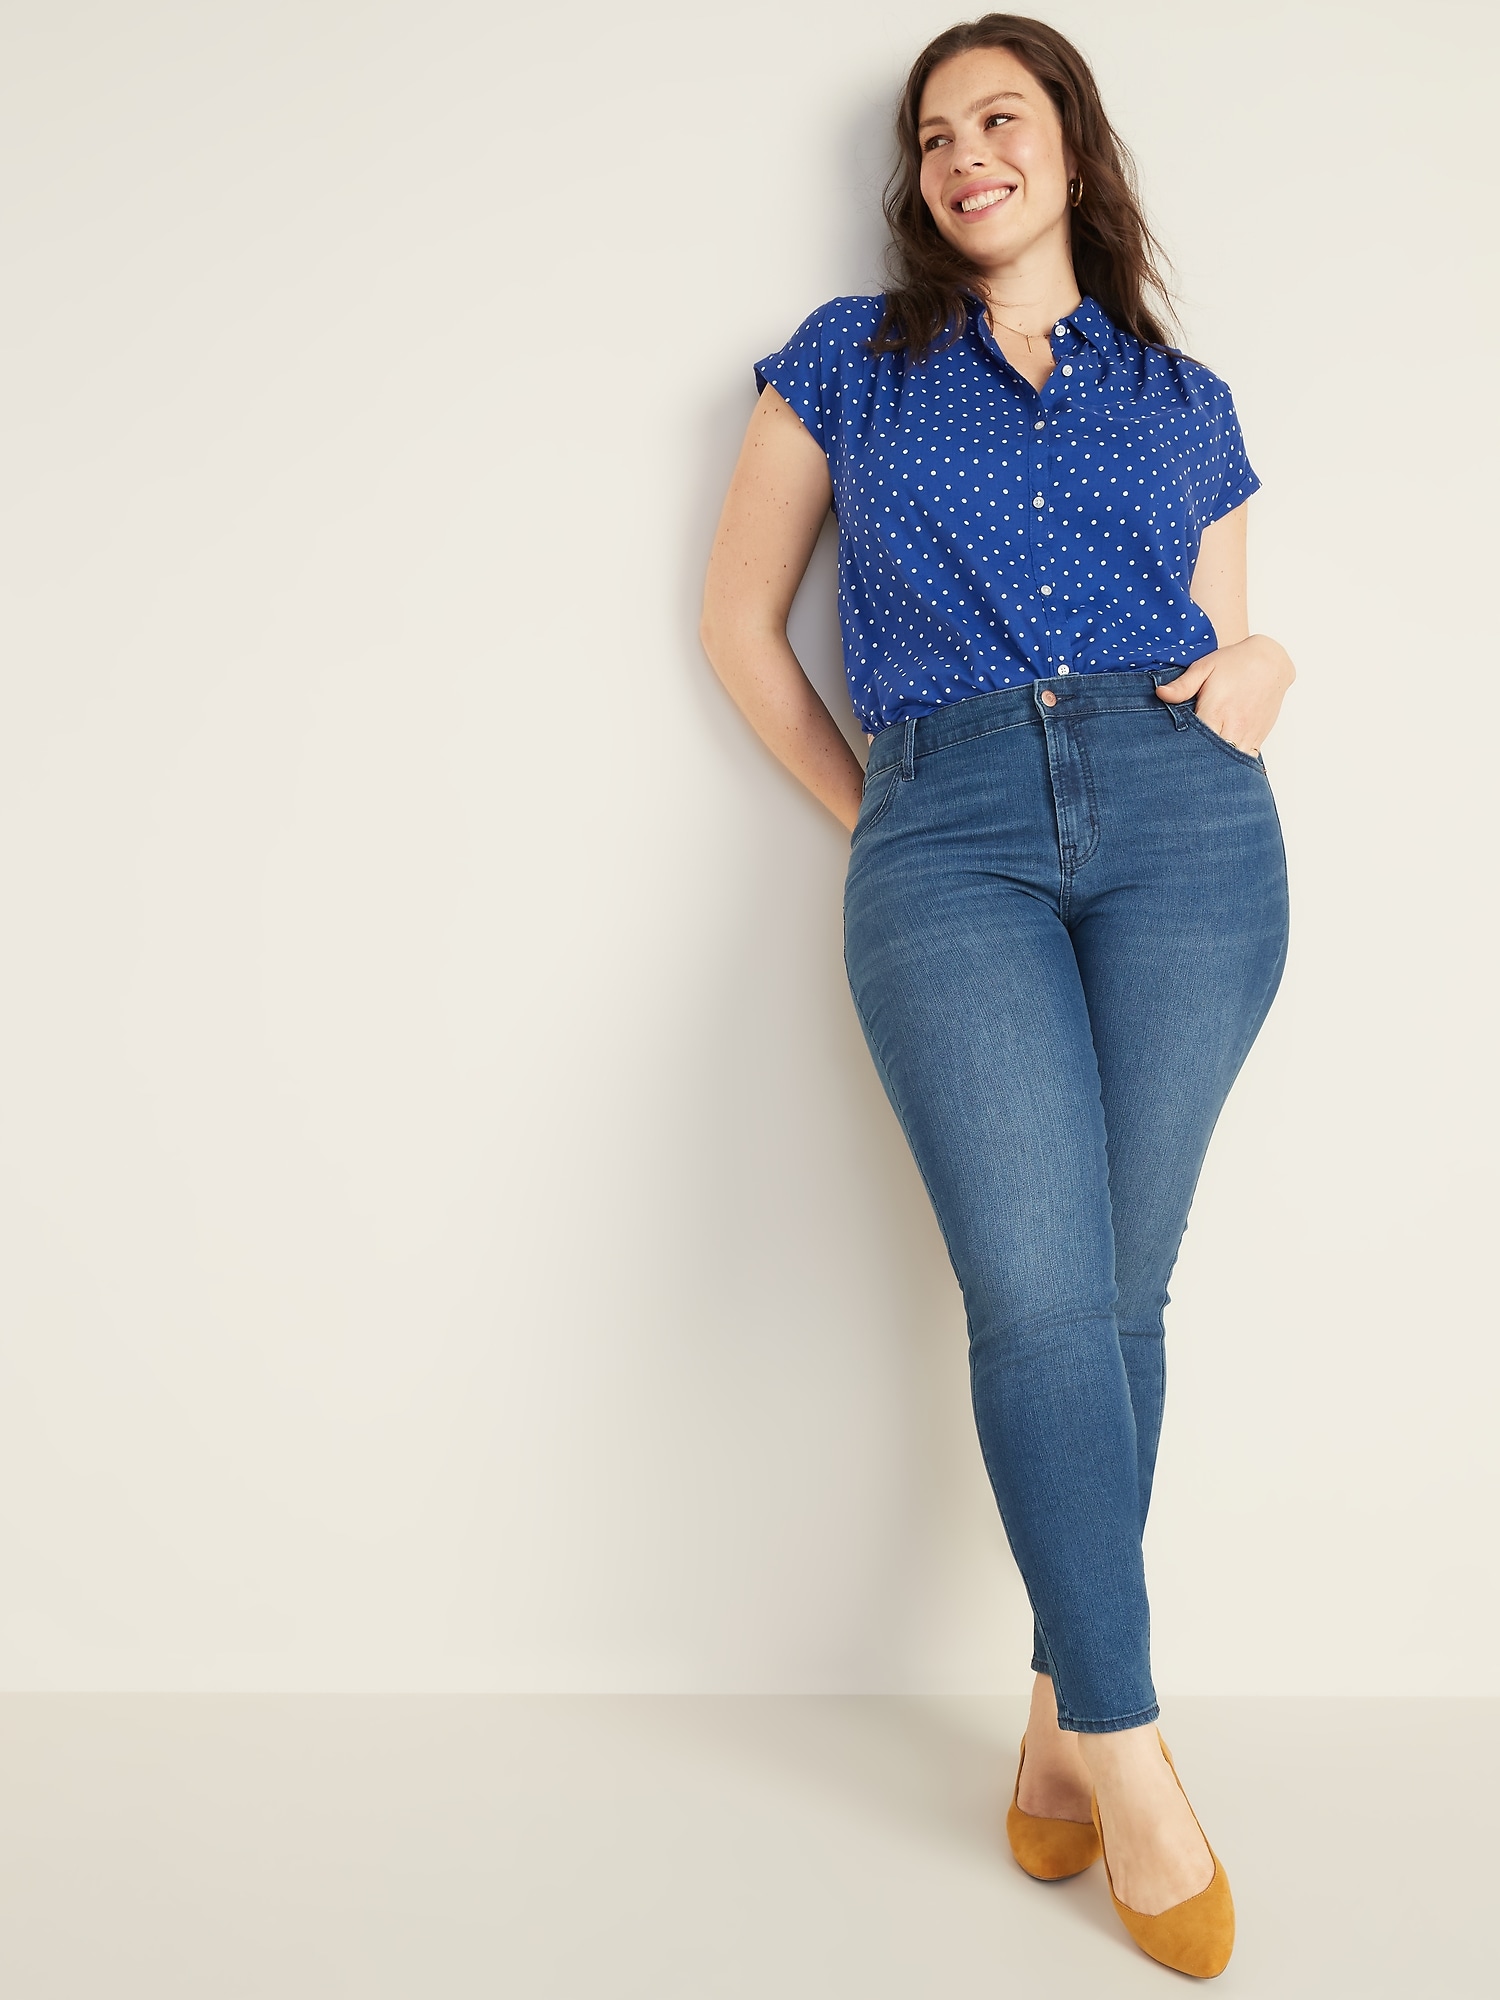 old navy original mid rise jeans